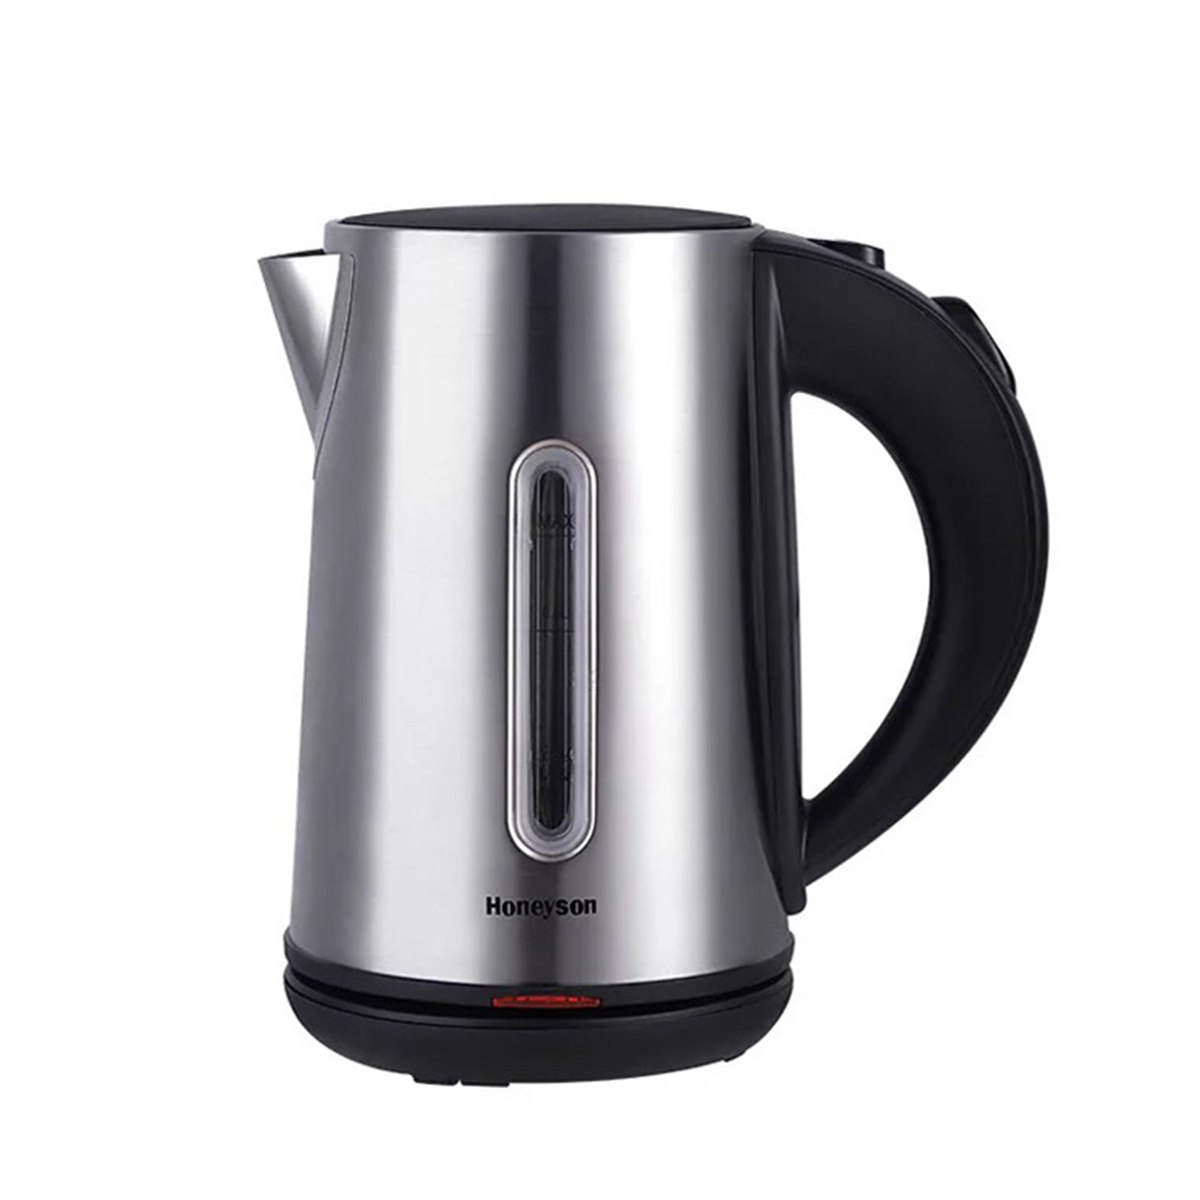 

Honeyson 1L Electric Kettle Stainless Steel Electric Boil Water Level Kettle For Coffee Milk Tea